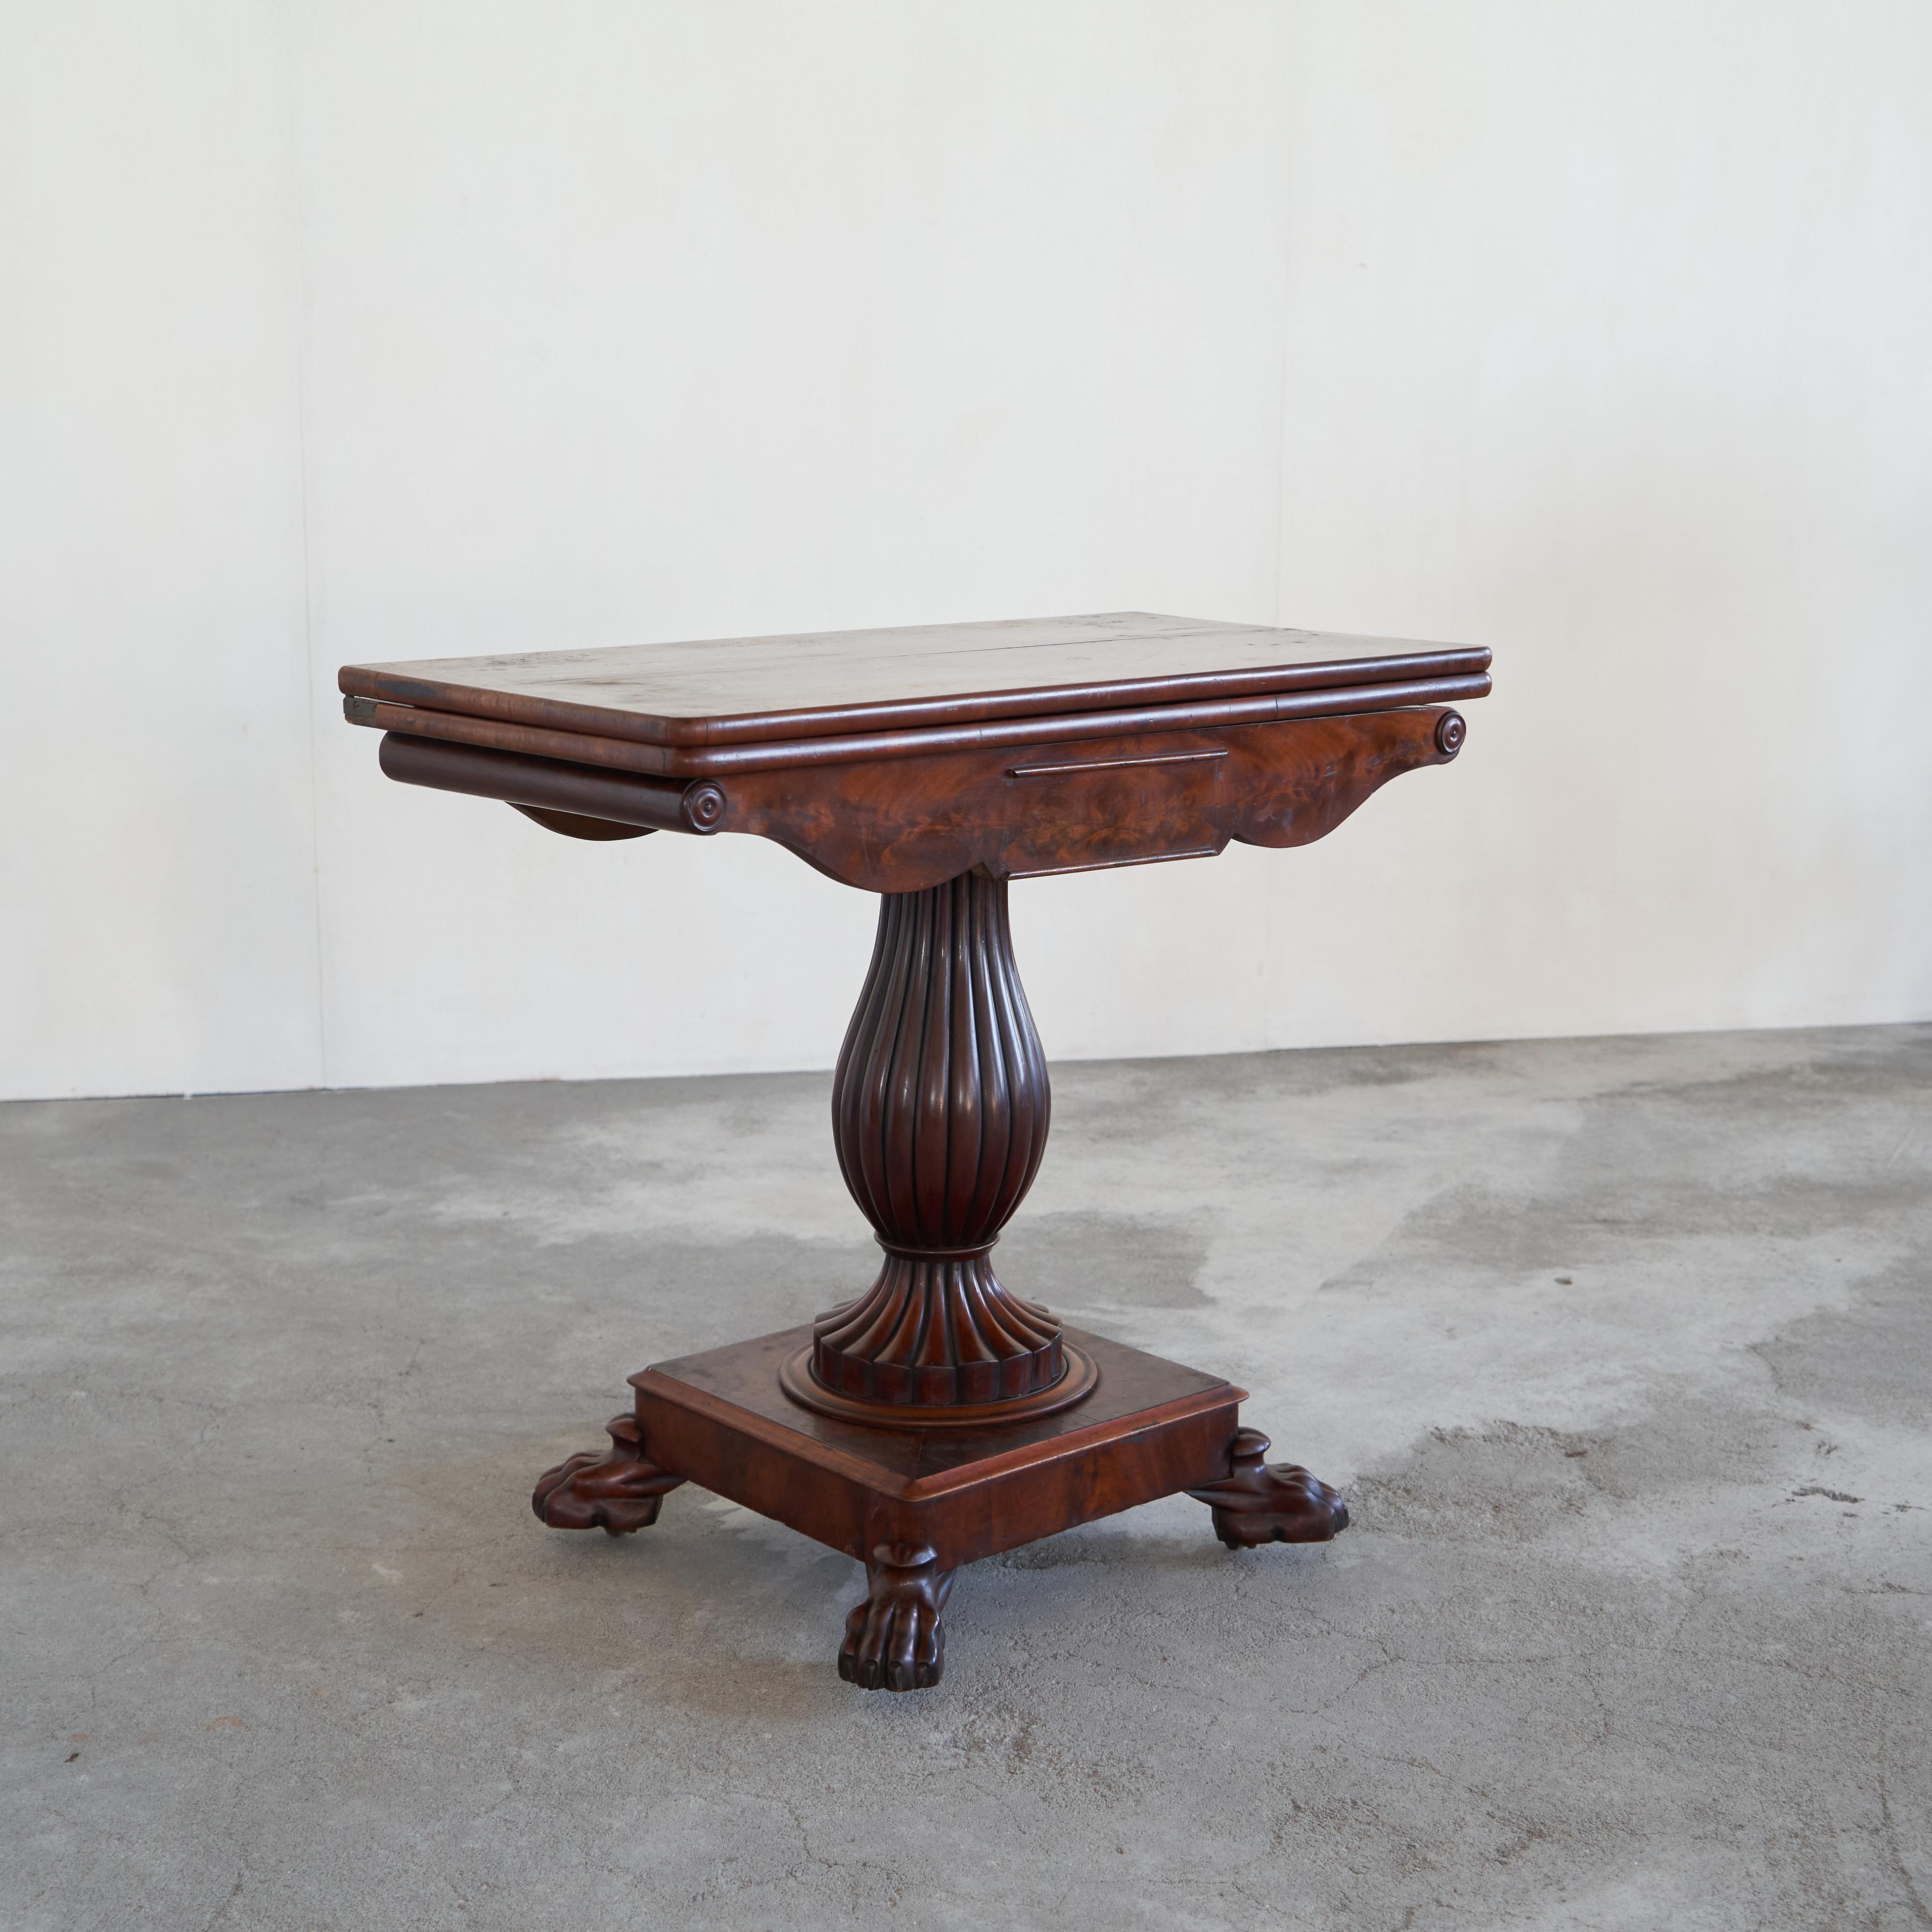 Antique Folding Pedestal Card Table, Mid 19th Century.

This is a wonderful folding card table with a very distinct pedestal base. Made in the middle of the 19th century, this is a true antique with a desirable appearance. Great details like the